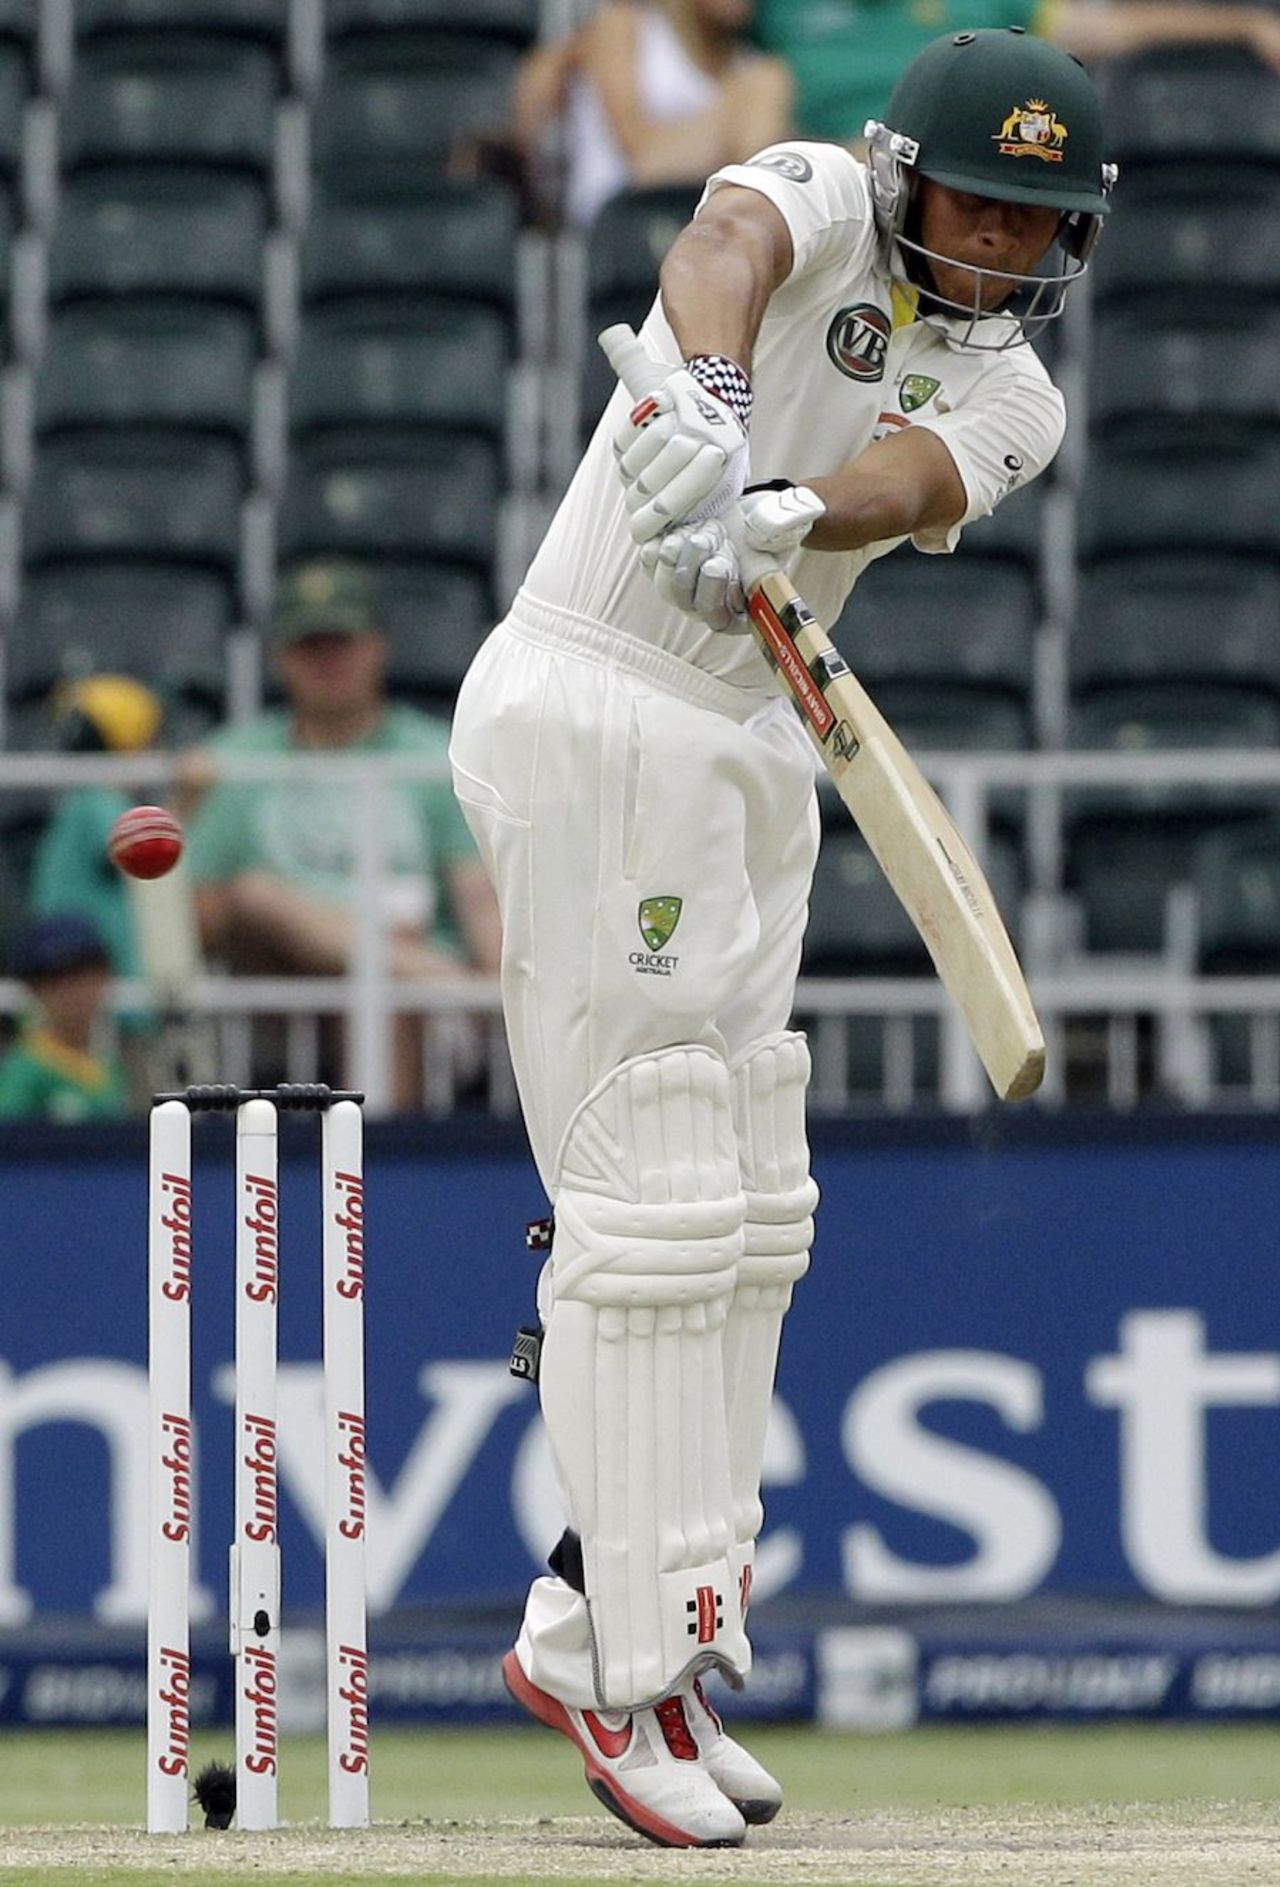 Usman Khawaja stands on his toes to play the ball down, South Africa v Australia, 2nd Test, Johannesburg, 4th day, November 20, 2011